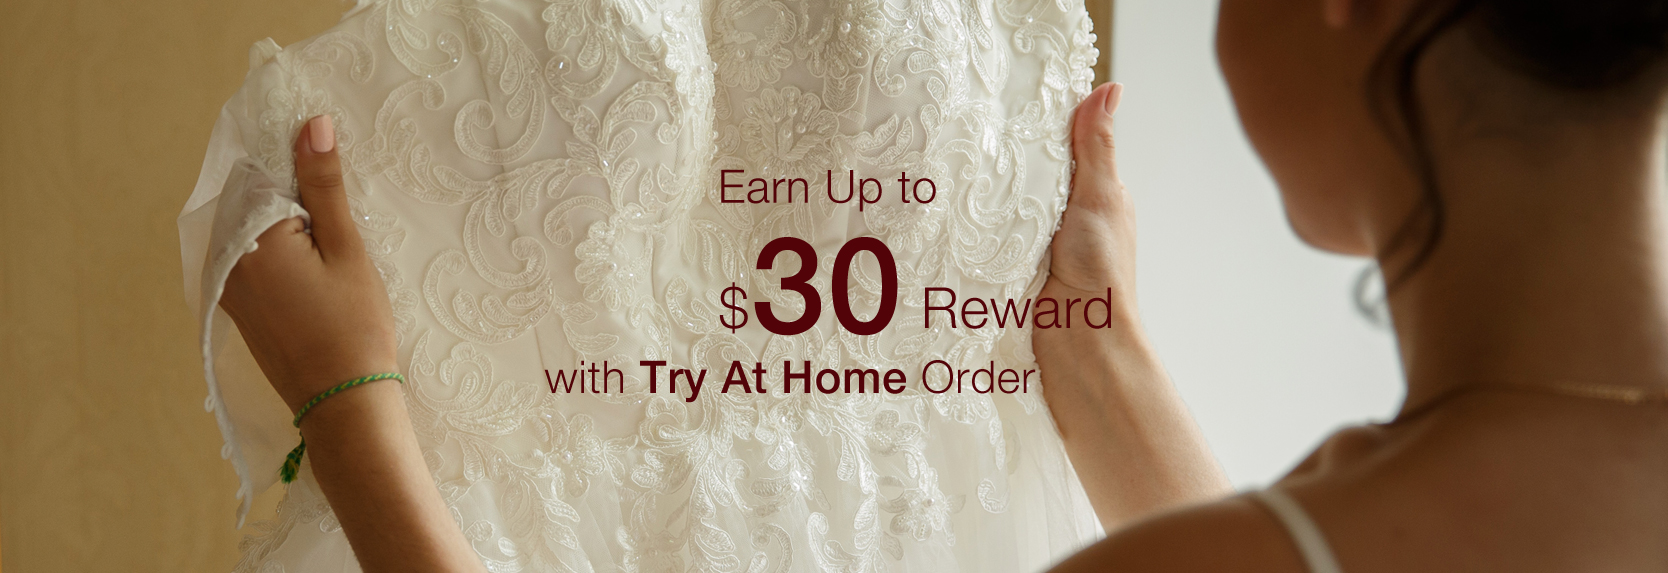 Earn $30 Reward with Try At Home